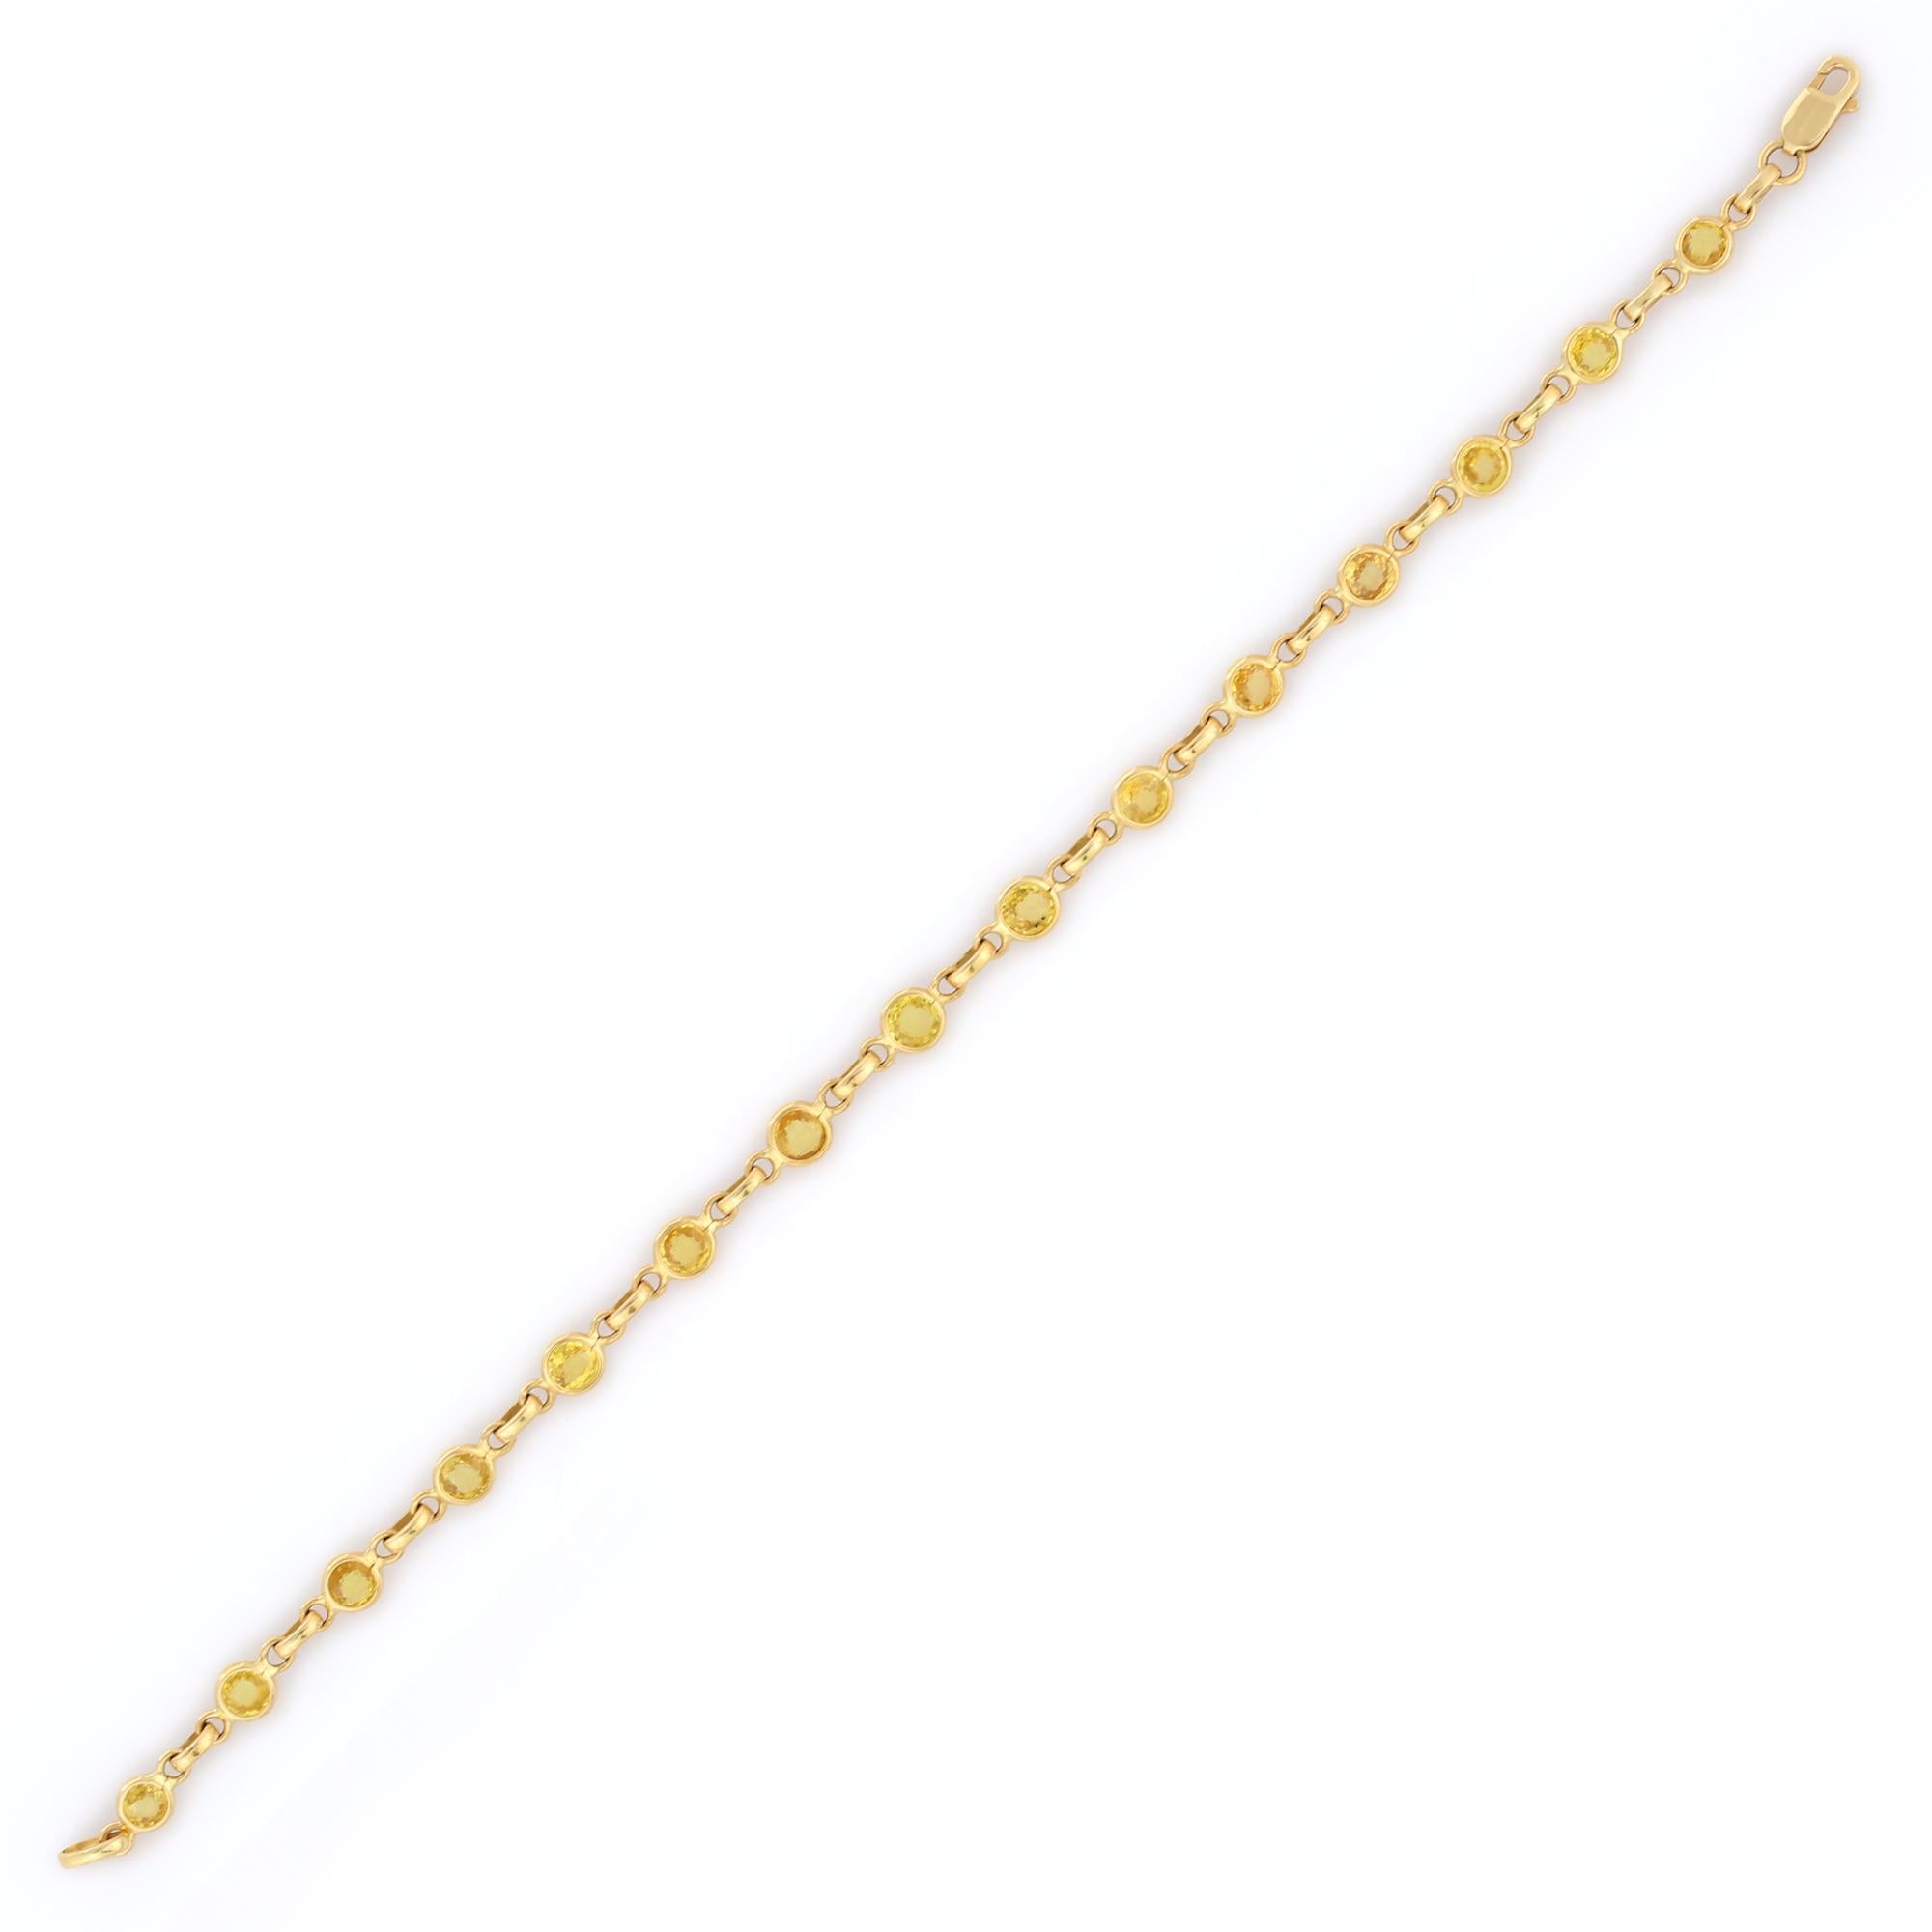 Modern Alluring 4.14 Ct Round Cut Yellow Sapphire Chain Bracelet in 18K Yellow Gold For Sale